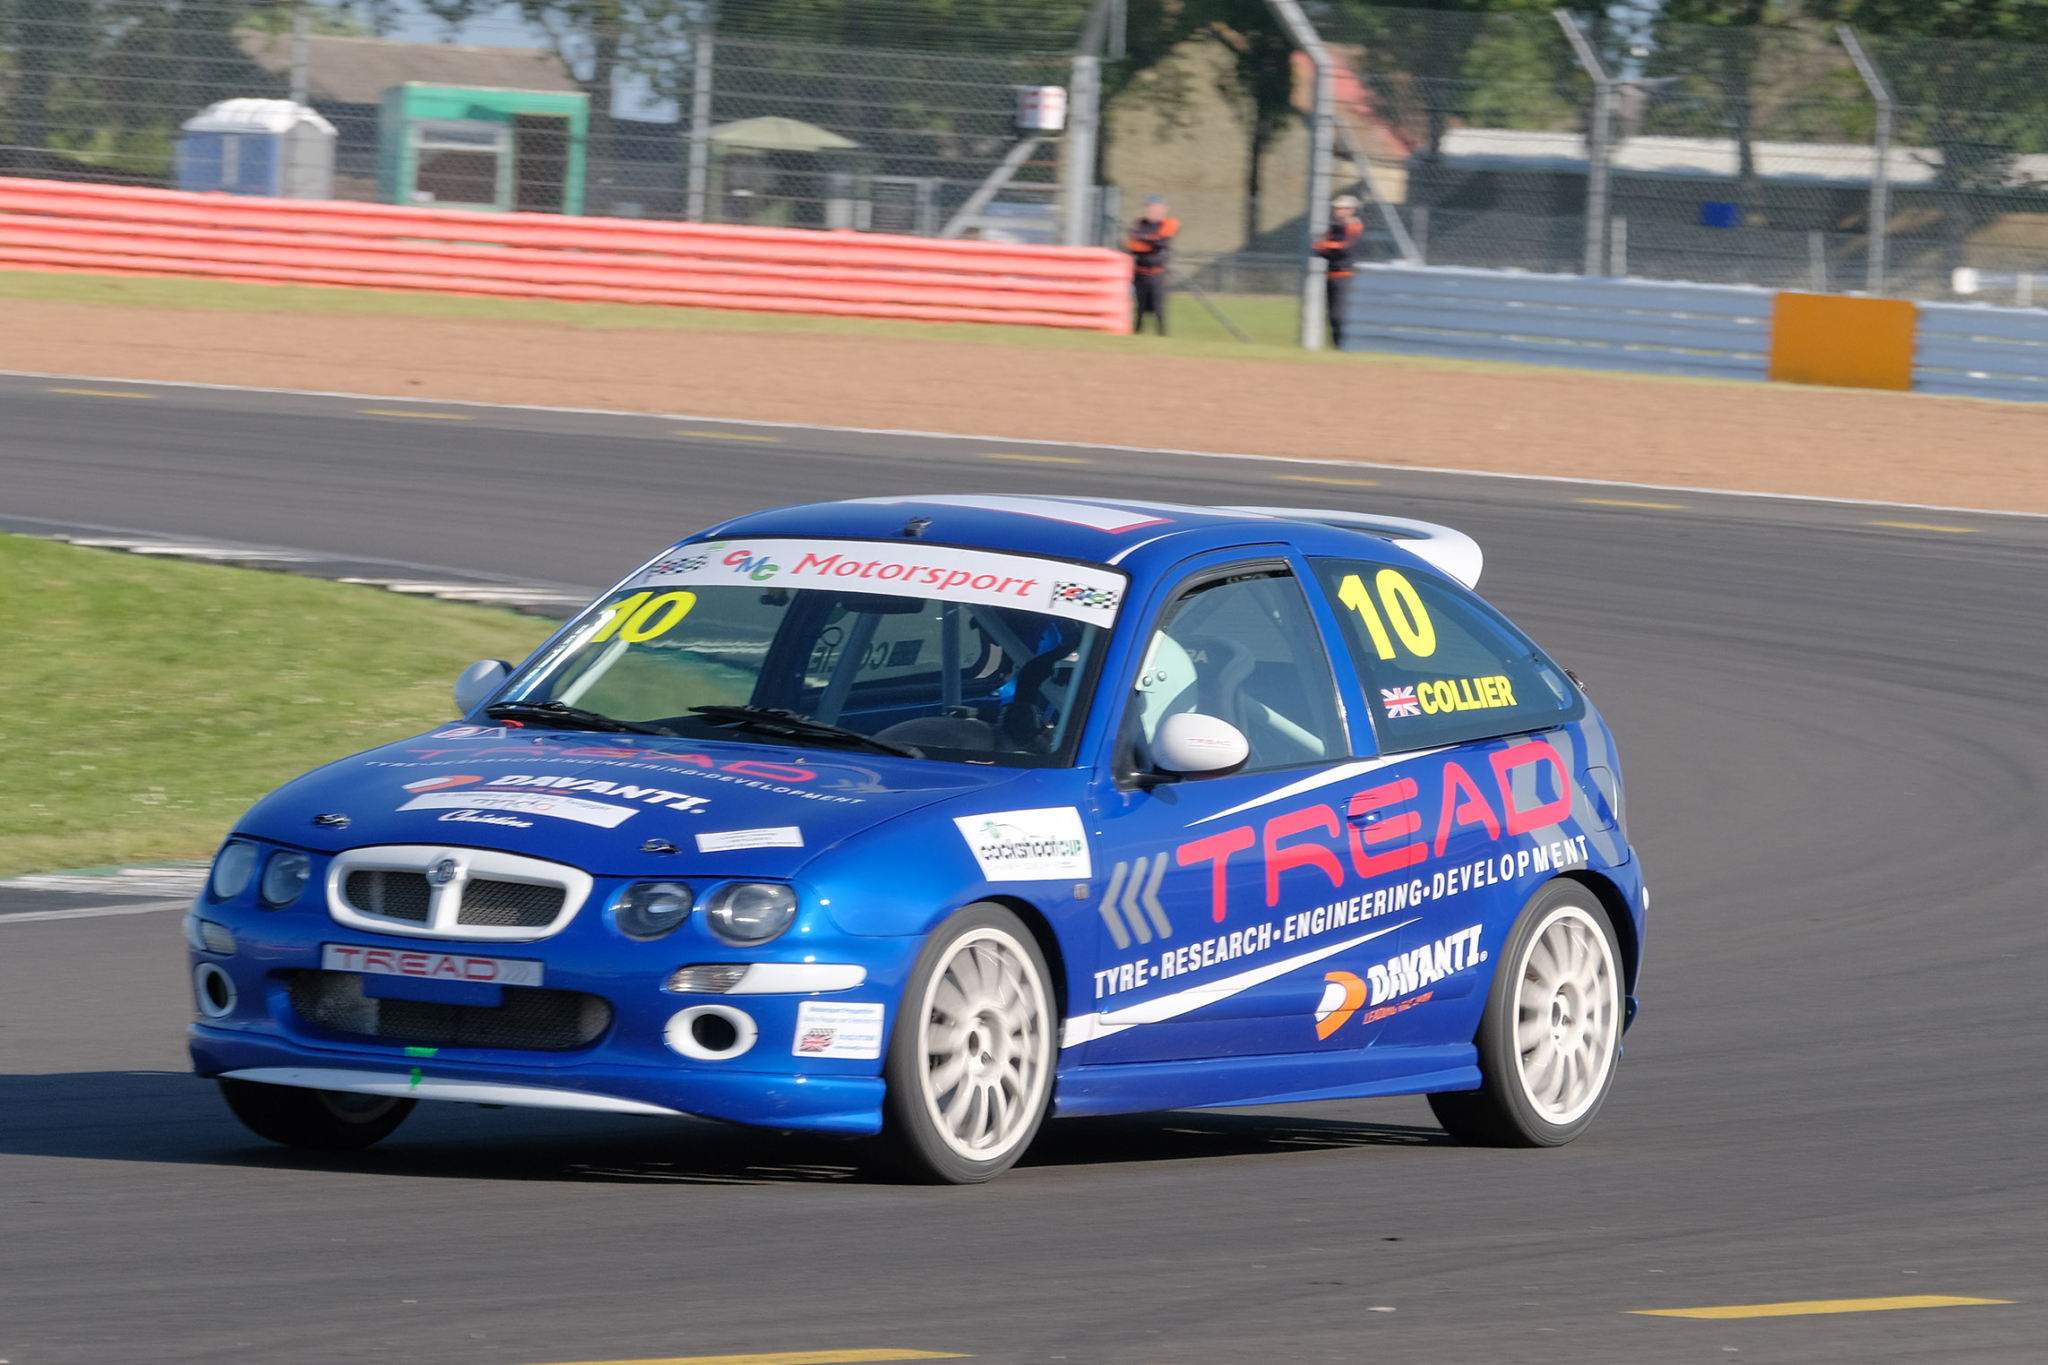 Tread test driver triumphs at Silverstone in MG series